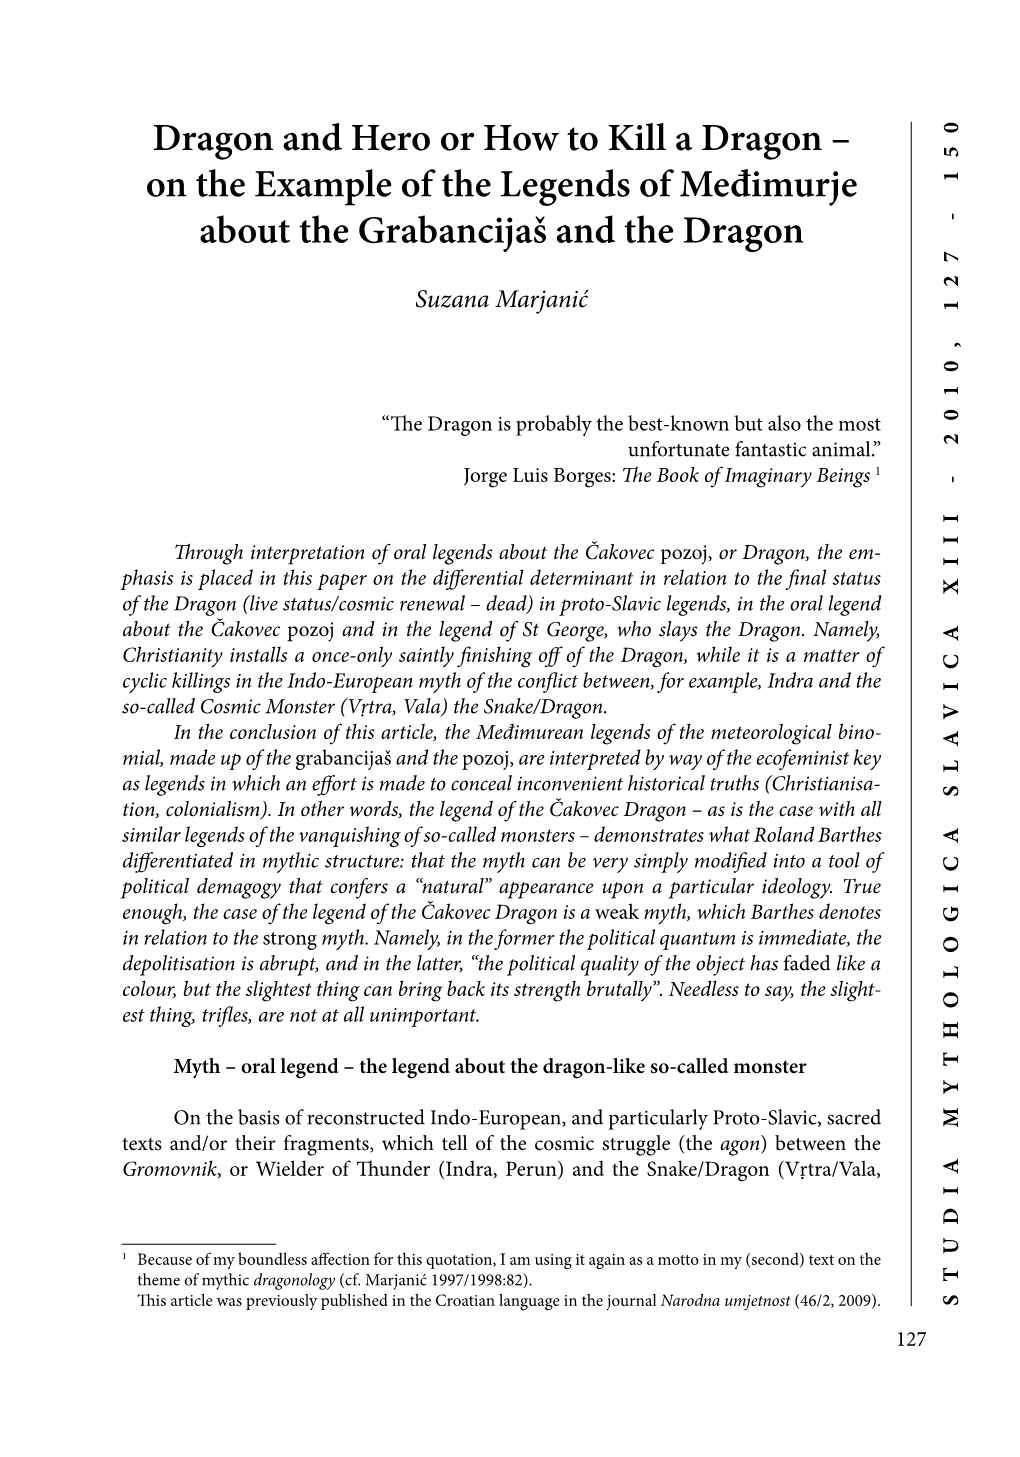 Dragon and Hero Or How to Kill a Dragon – on the Example of the Legends of Međimurje About the Grabancijaš and the Dragon